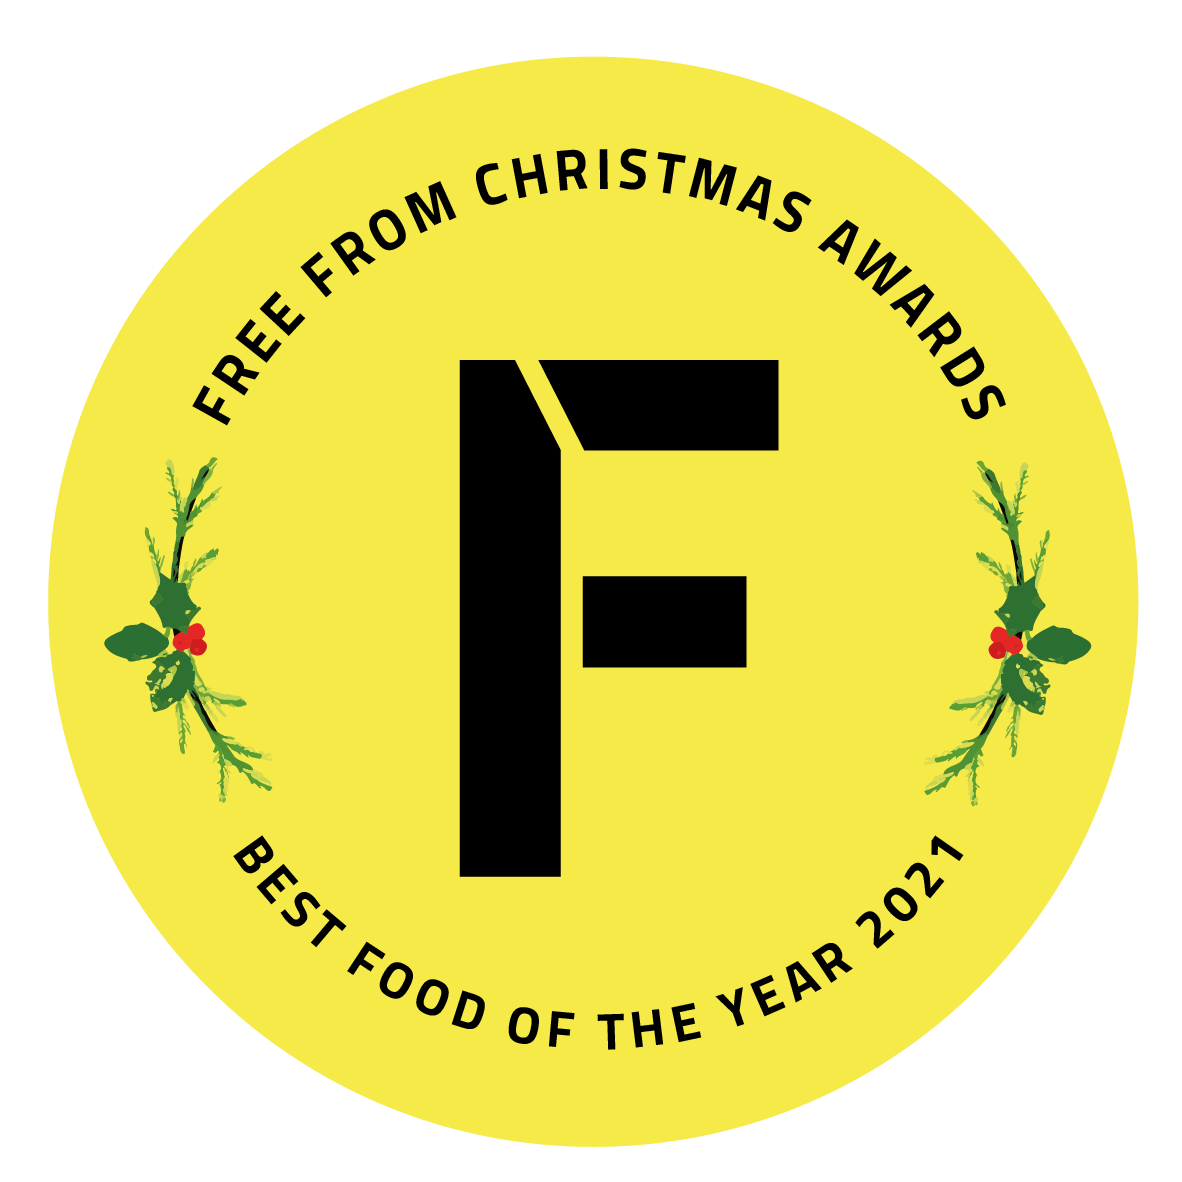 A best food of the year award